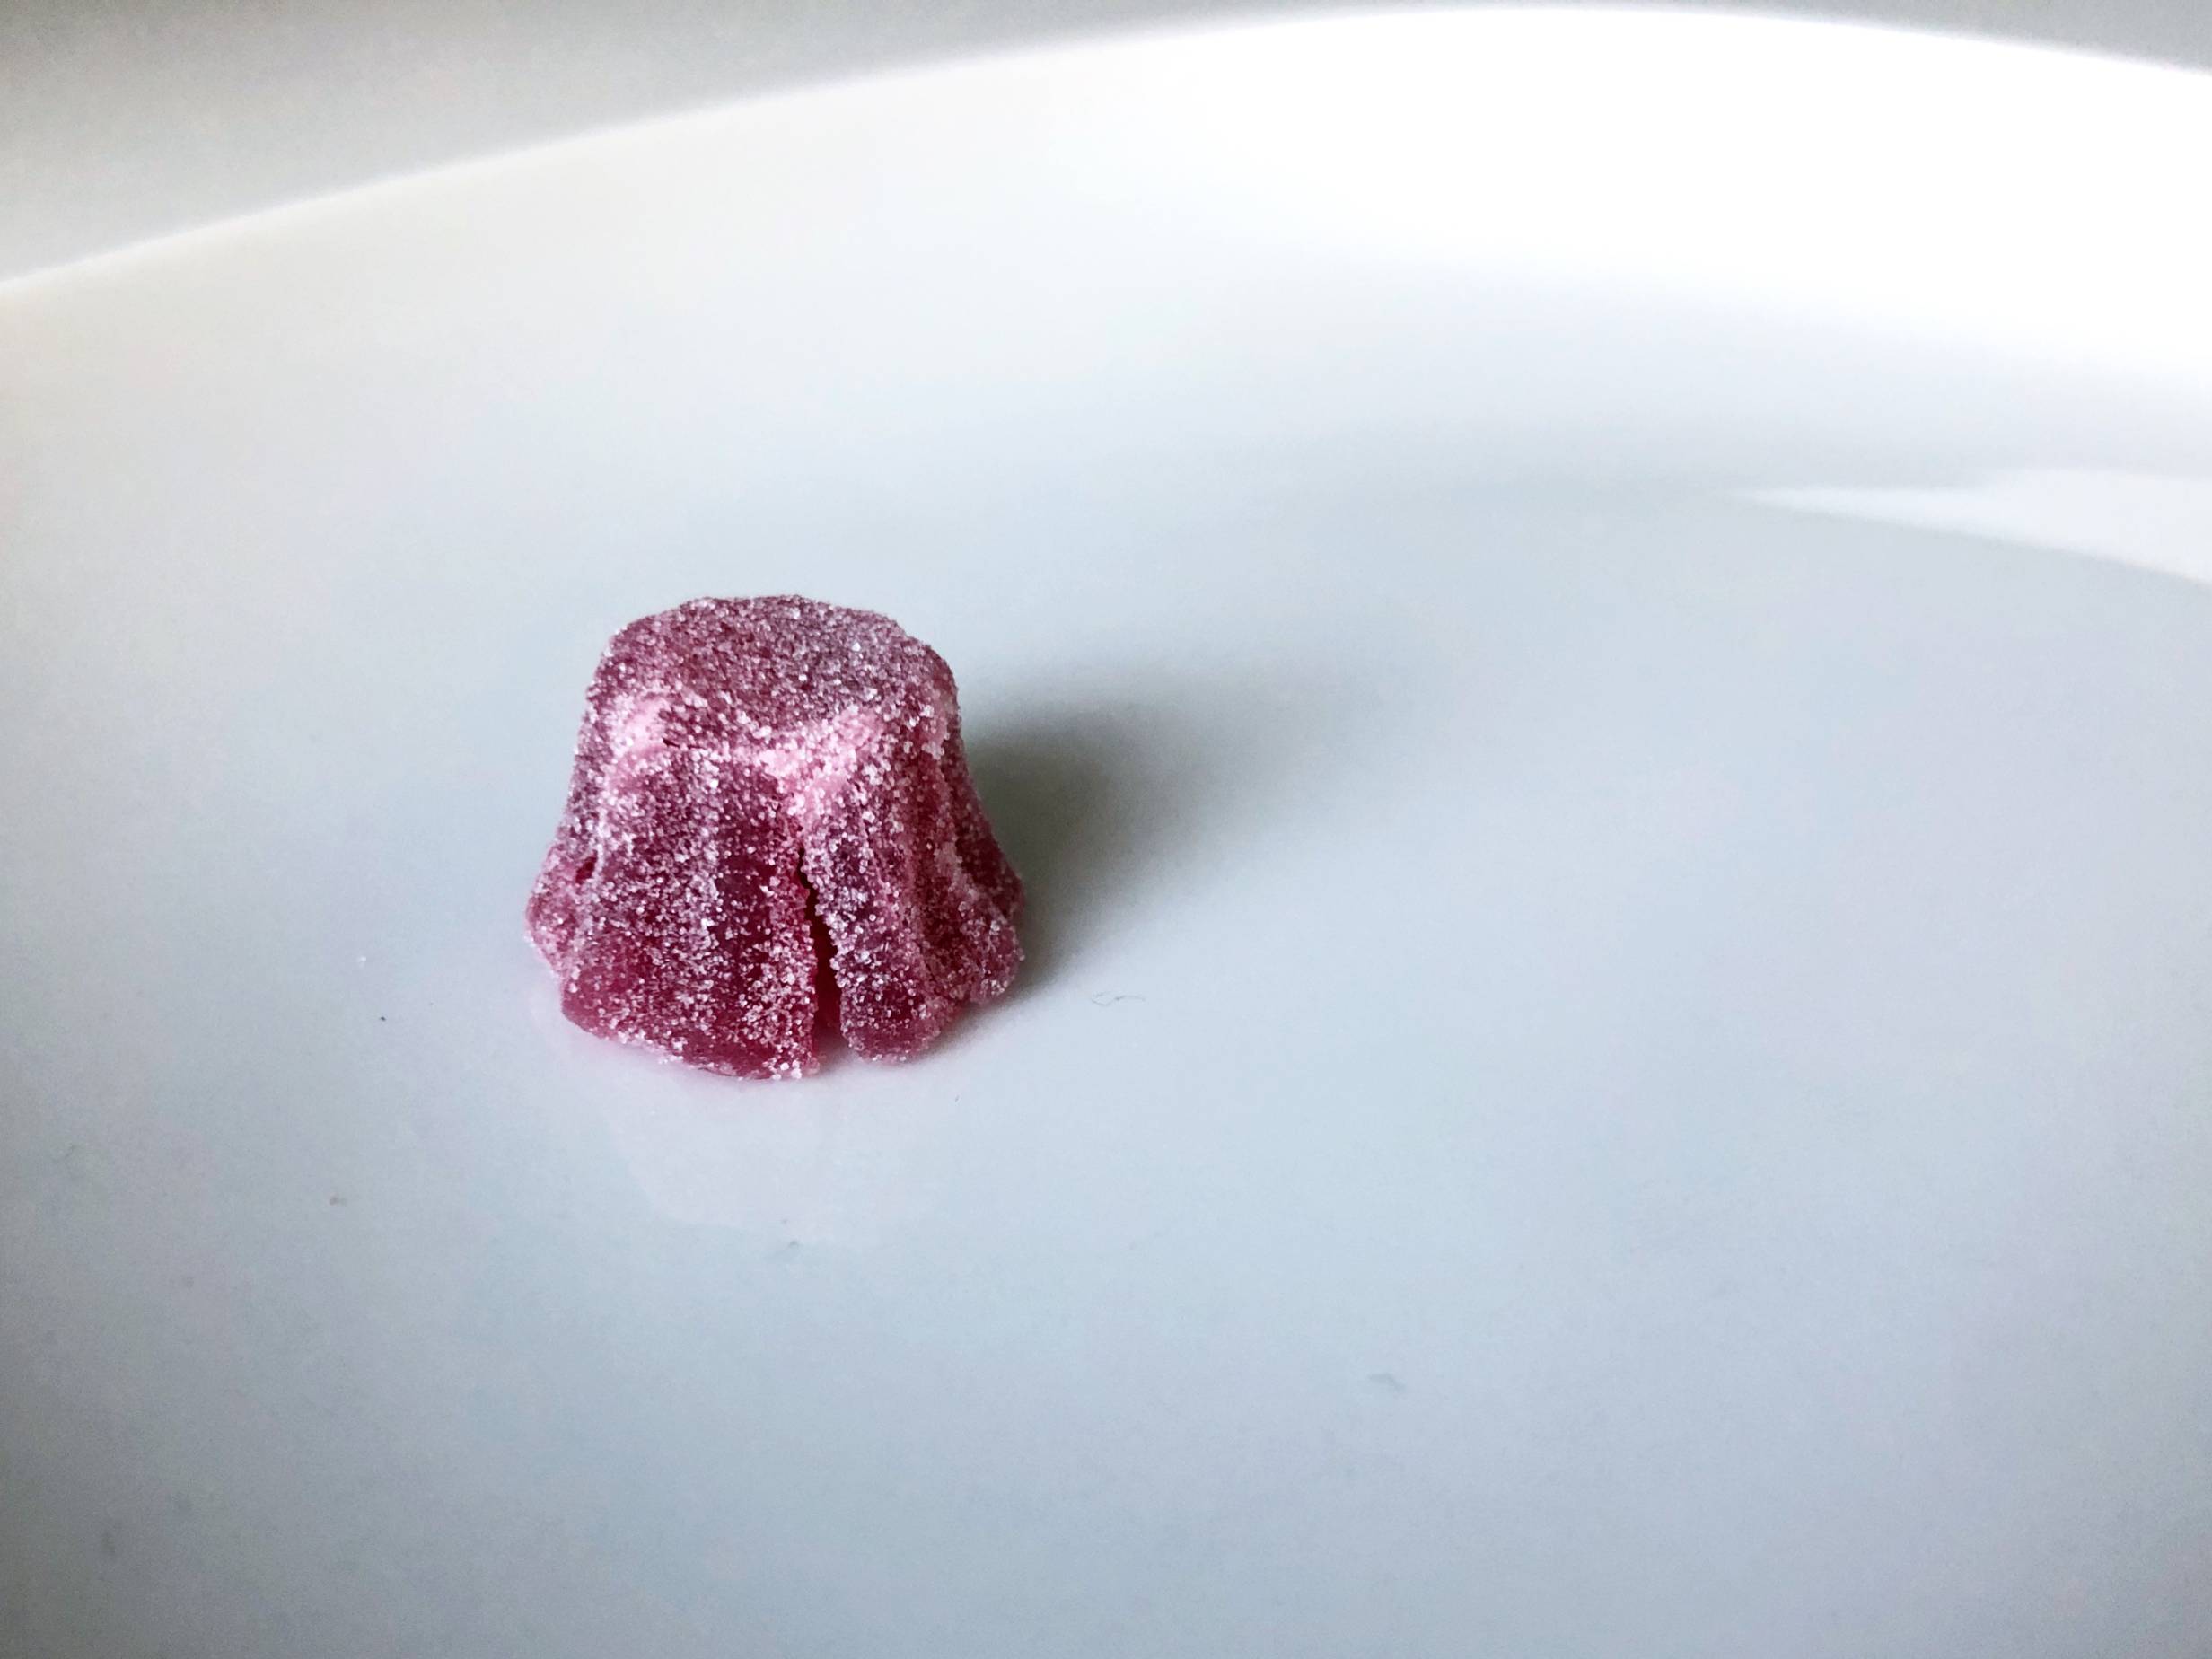 A small purple gummy covered in white granulated sugar sits on a white porcelain plate. Photo by Alyssa Buckley.